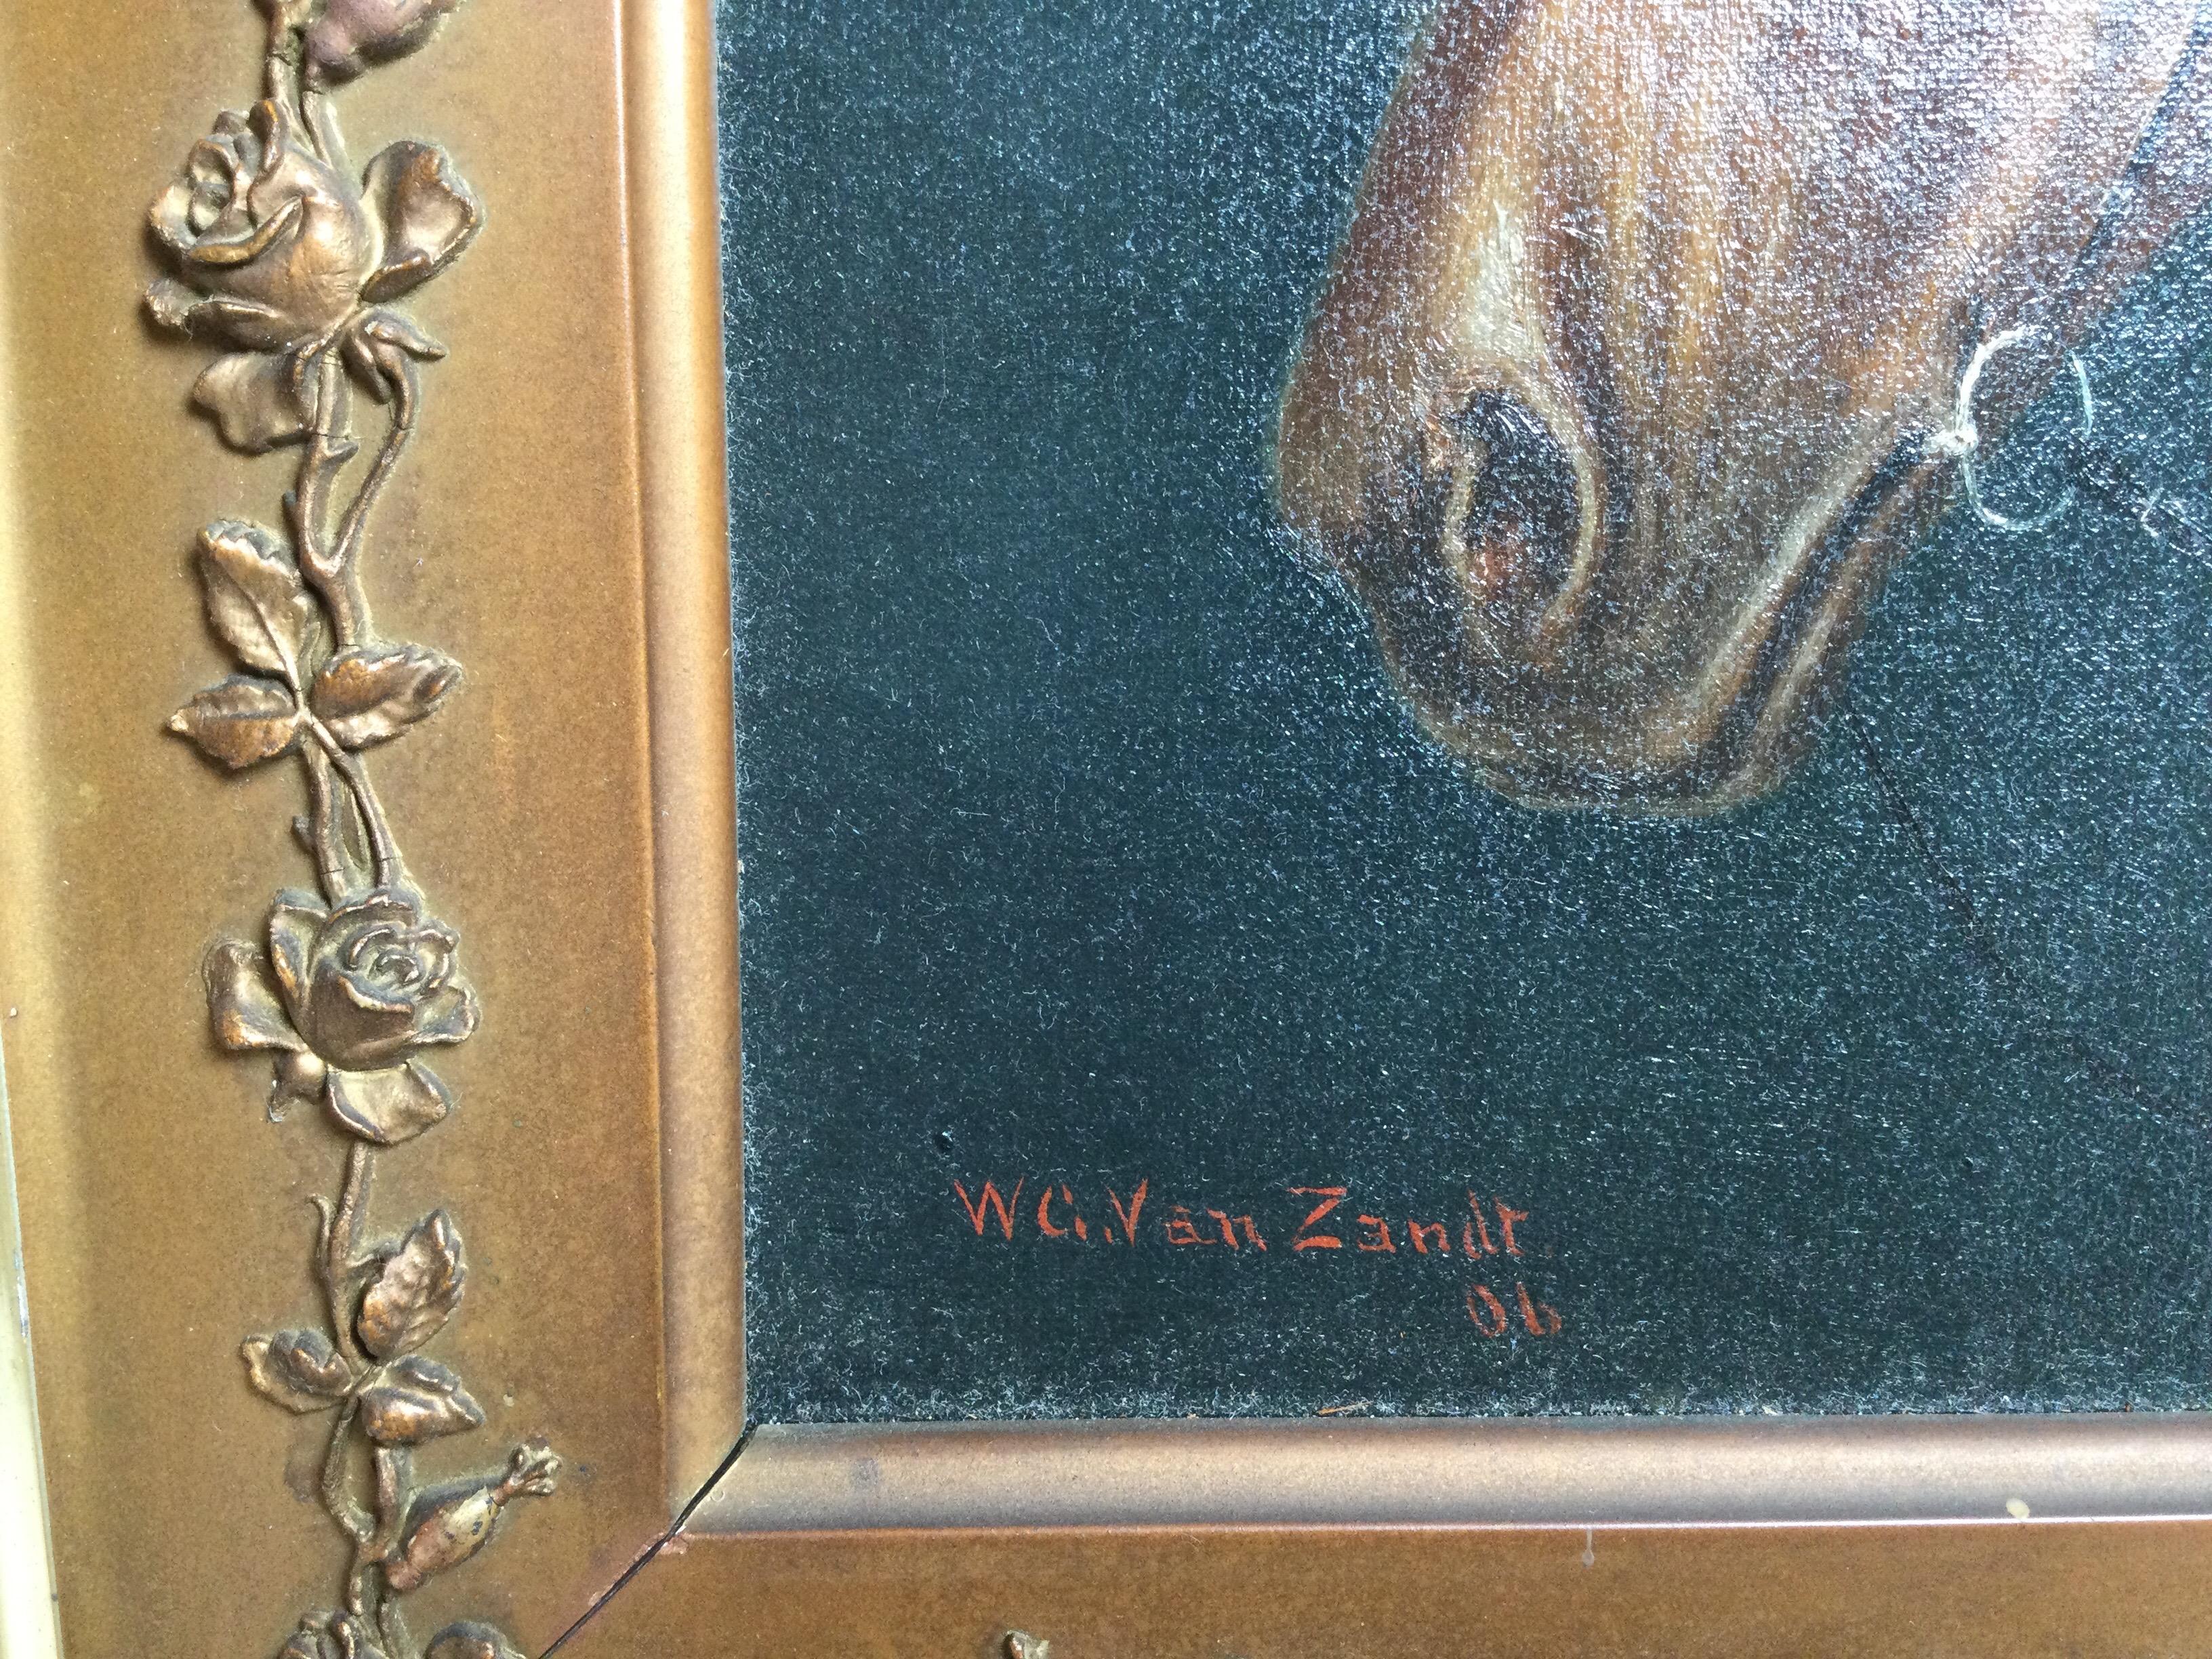 Portrait of a horse oil on canvas by William Van Zandt. Measures: 15 1/2